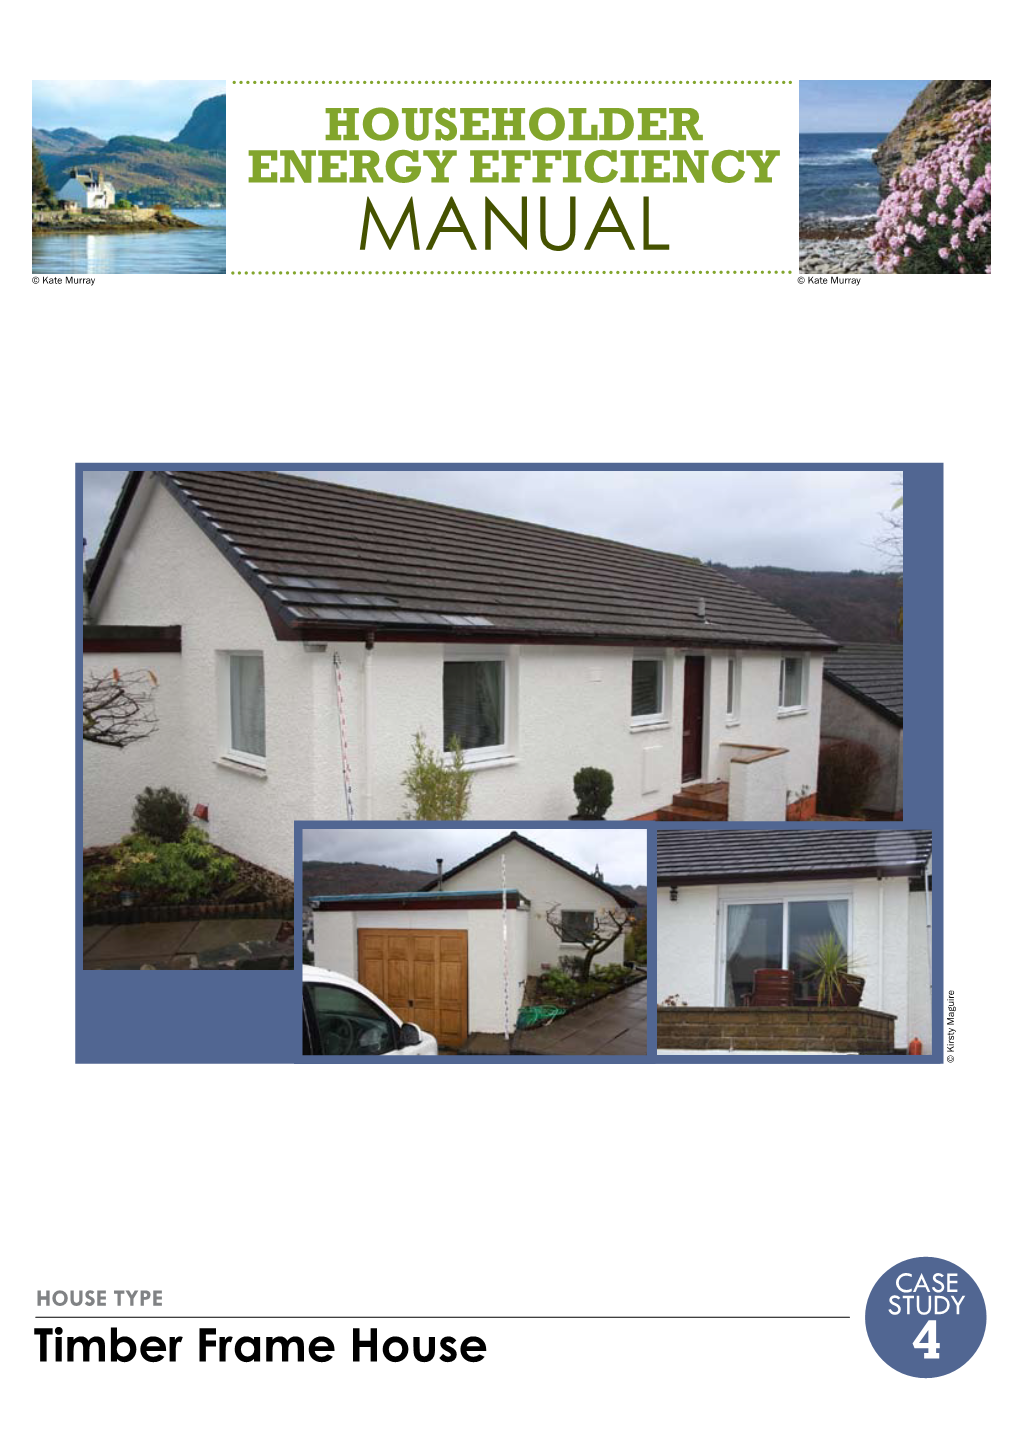 Timber Frame House 4 HOUSEHOLDER ENERGY EFFICIENCY MANUAL Introduction